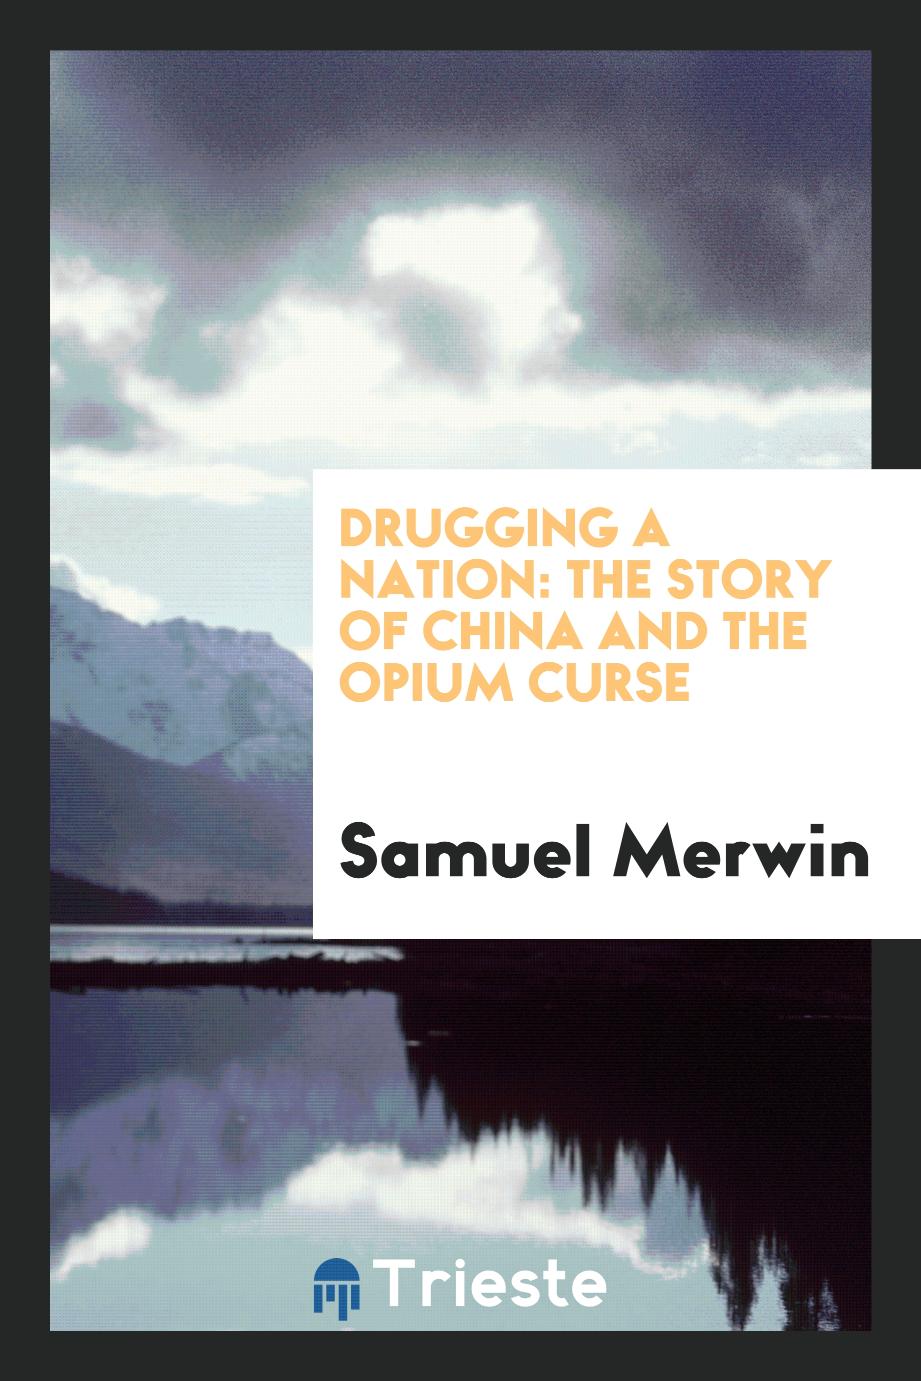 Samuel Merwin - Drugging a Nation: The Story of China and the Opium Curse